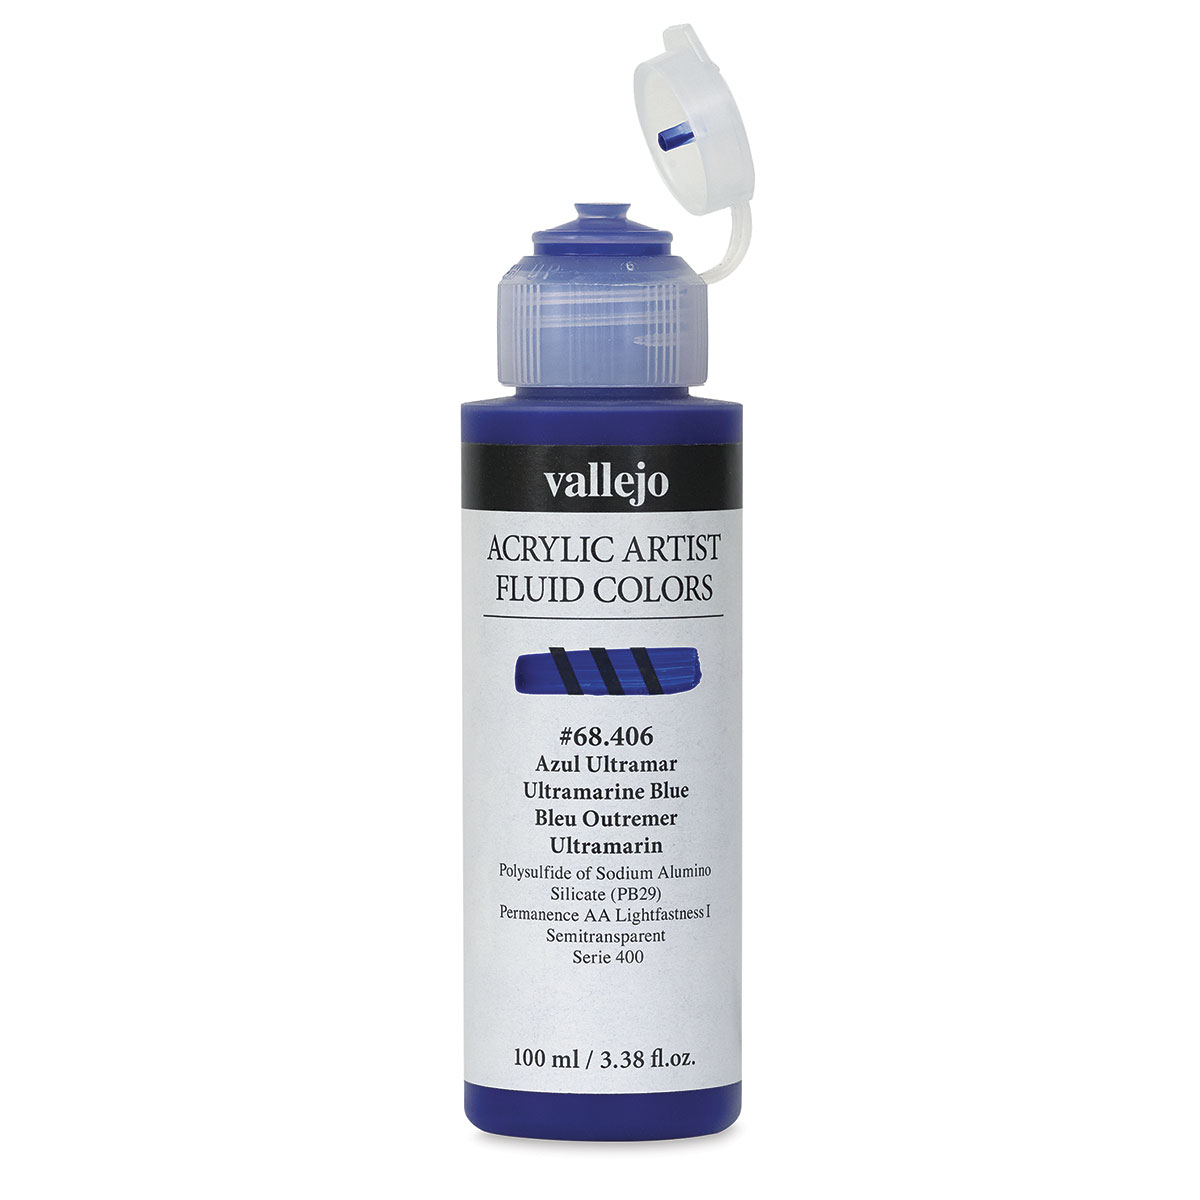 Art Academy - Vallejo Silicone Oil Cell Medium is useful to create